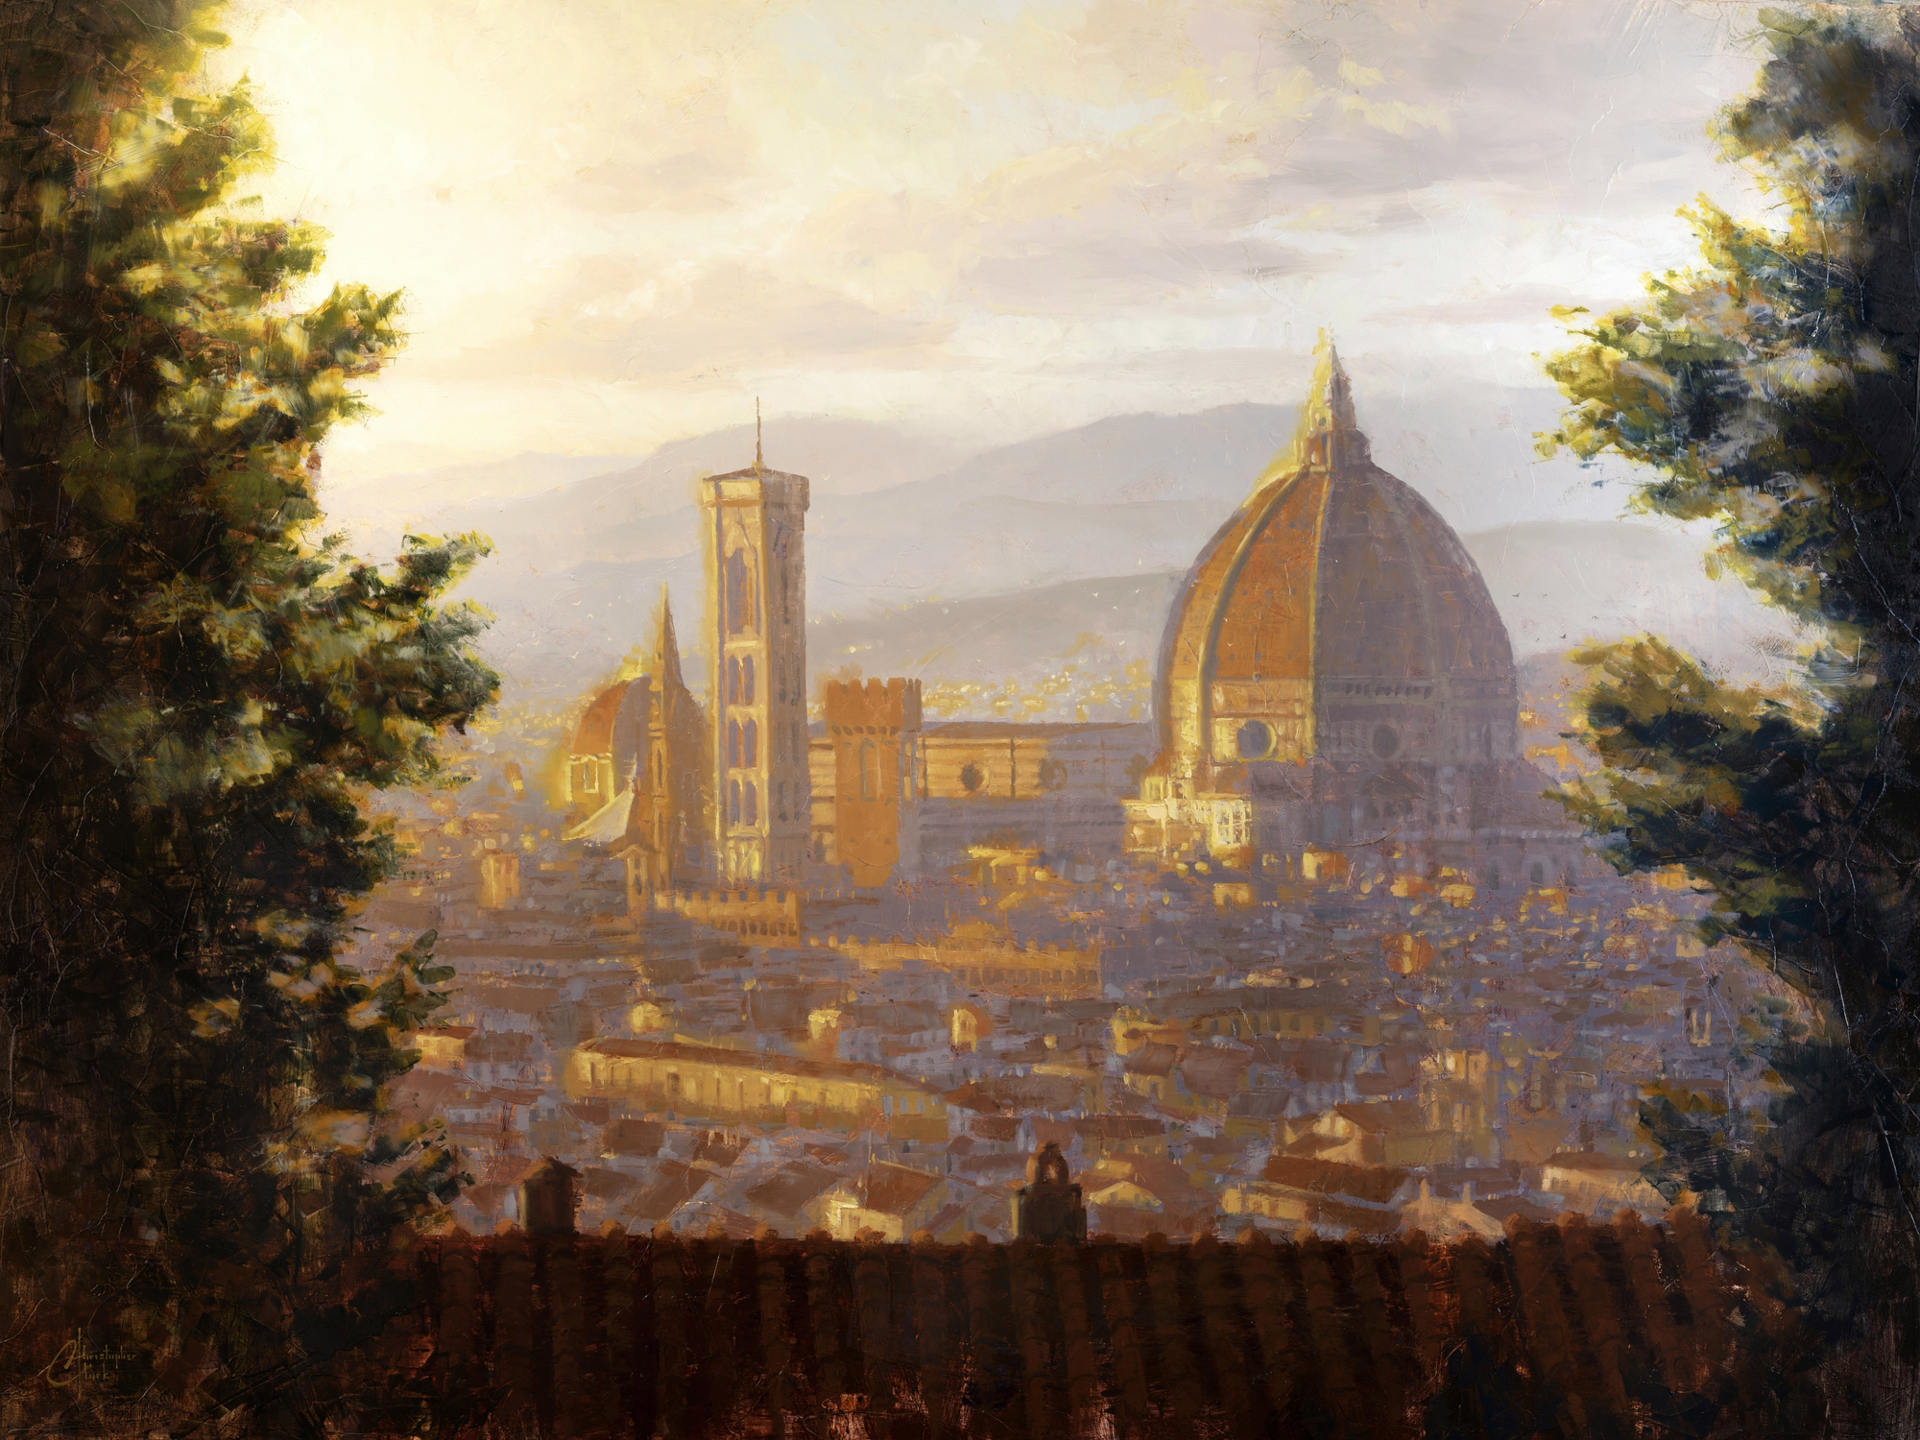 Florence, Italy - Duomo from a Distance by Christopher Clark